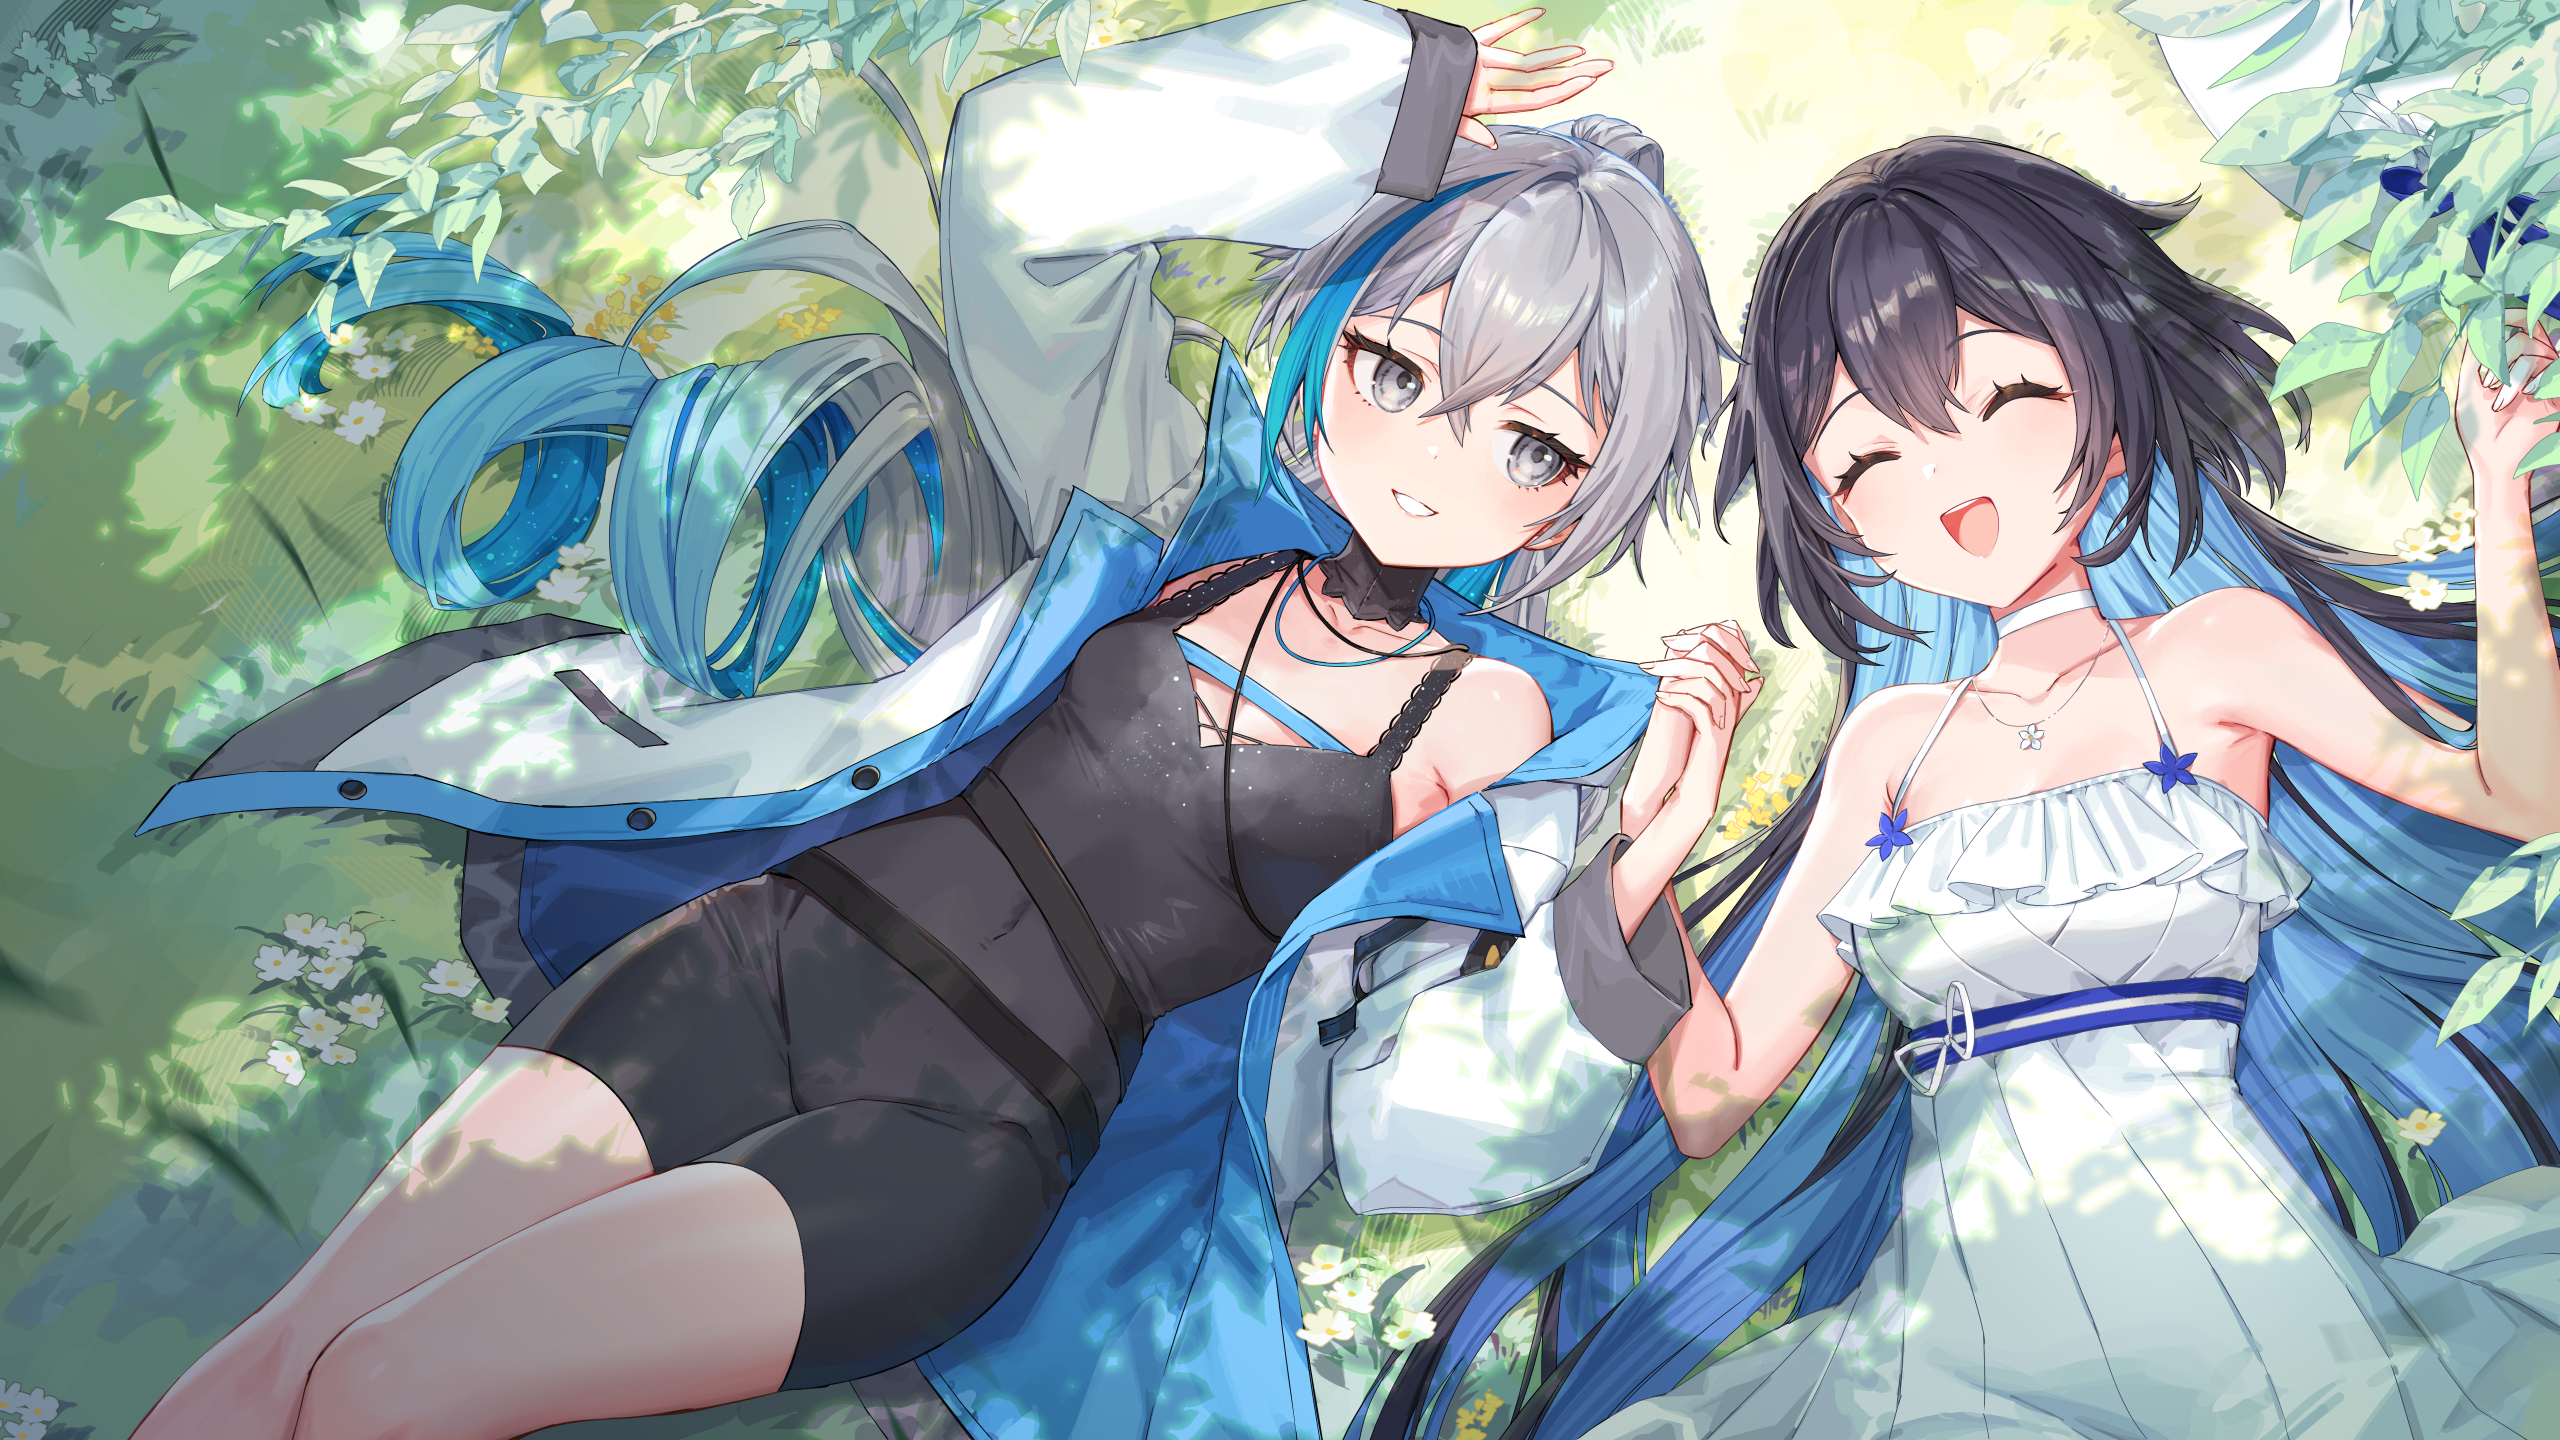 koijibashi - What anime name are these two characters lying in the grass  from? - Anime & Manga Stack Exchange